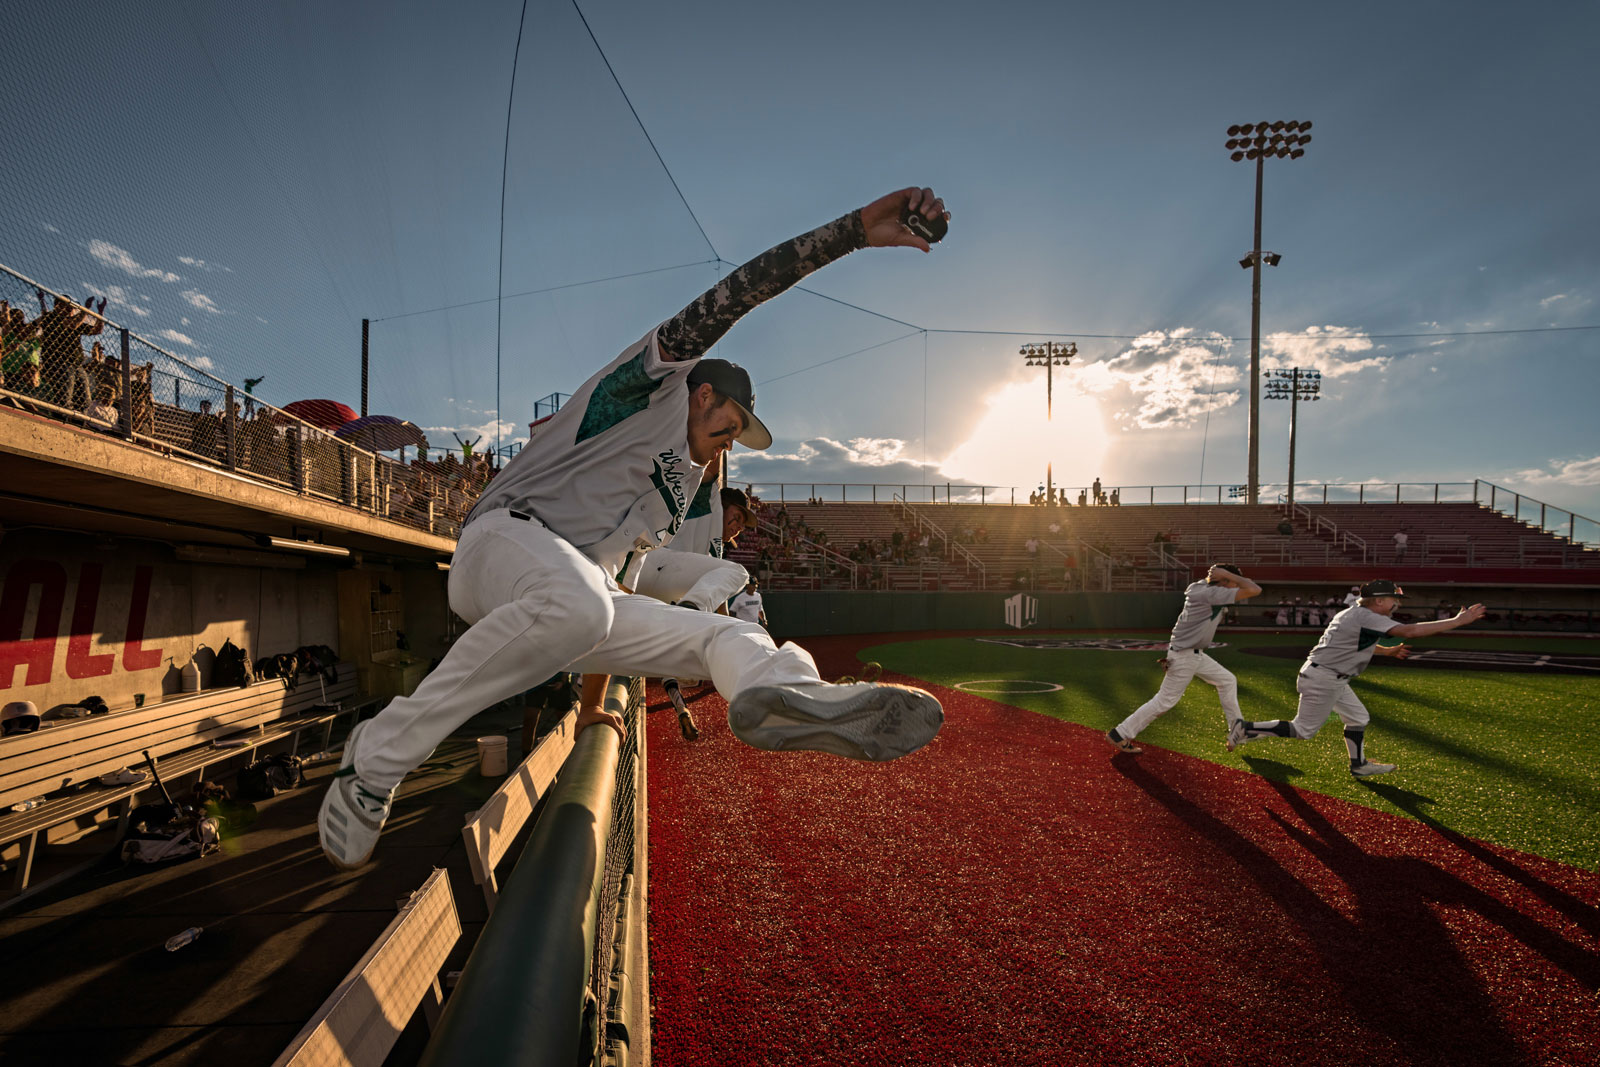 Members of the Texico High School Wolverines jump out of the dugout following the game against the Eunice High School Cardinals in the NMAA Baseball State Division 2A Championships at Santa Ana Star Field in Albuquerque, New Mexico. The Wolverines defeated the Cardinals 9-5 to win the state championship. 